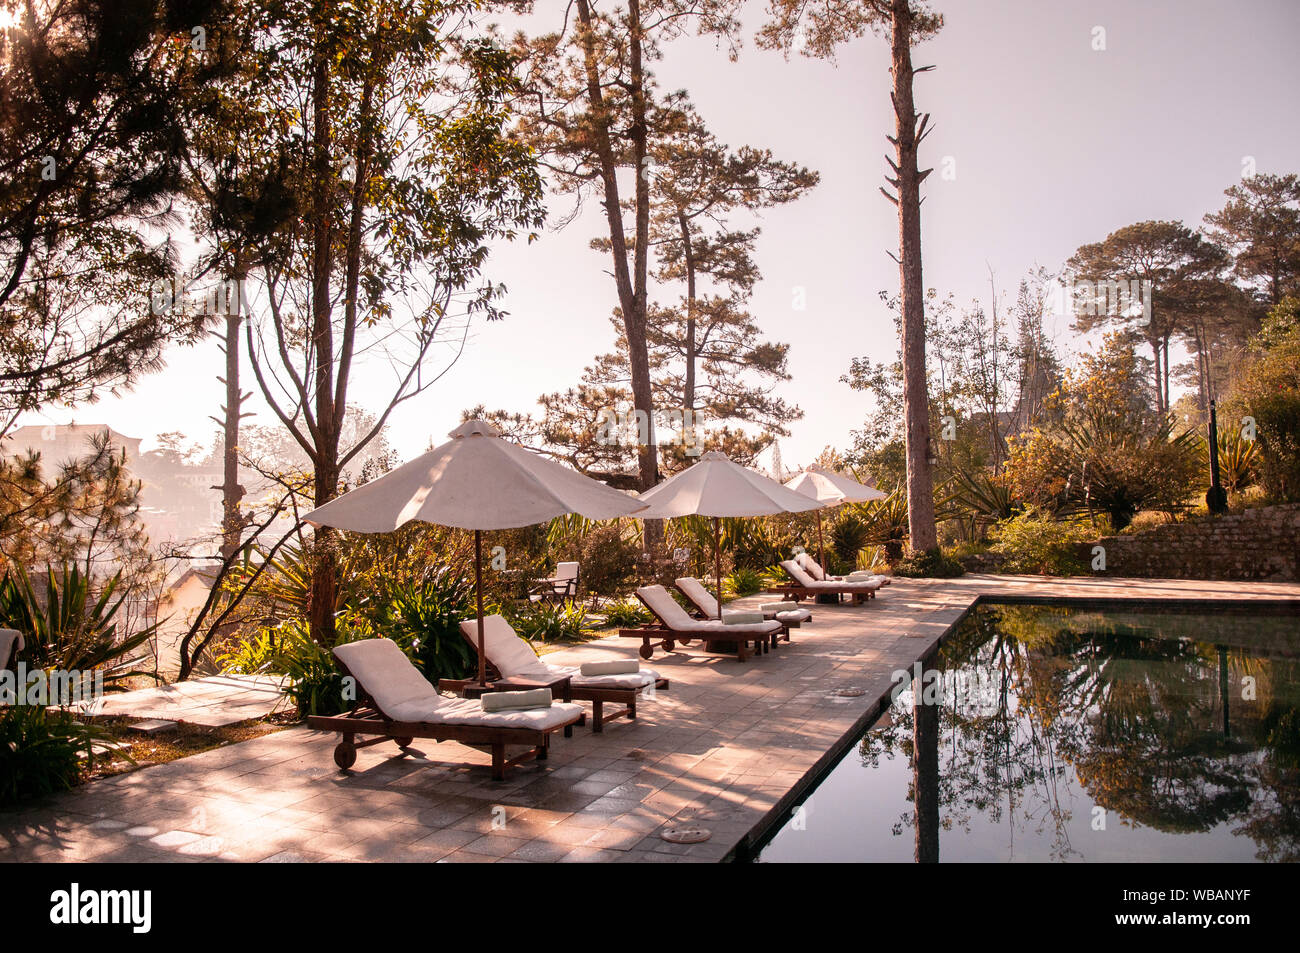 FEB 26, 2014 Dalat, Vietnam - Tropical resort style swimming pool in pine forest under sunlight flare in late winter with reflection on water surface Stock Photo